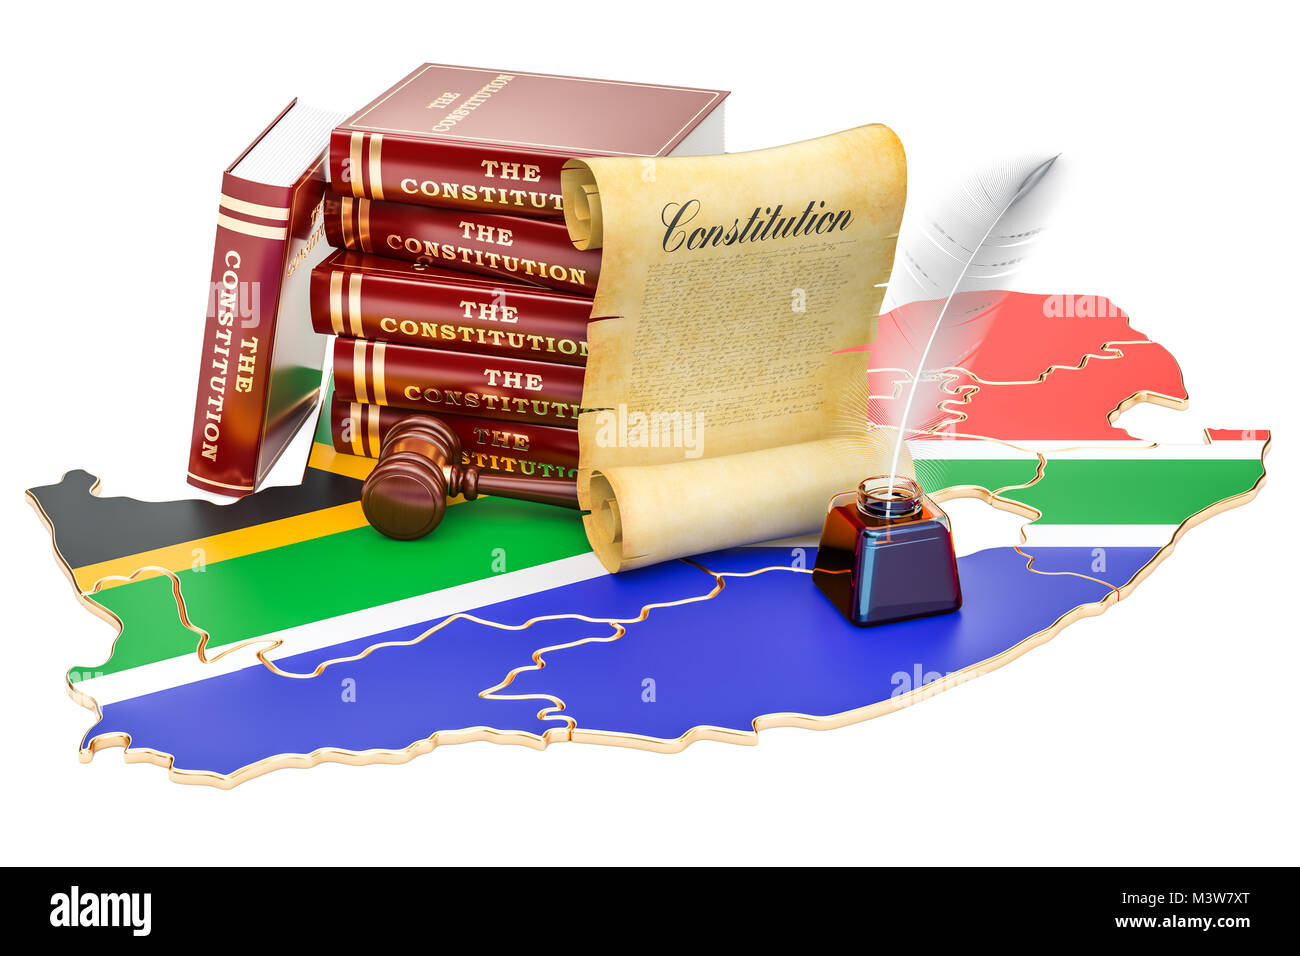 Constitution of South Africa concept, 3D rendering Stock Photo